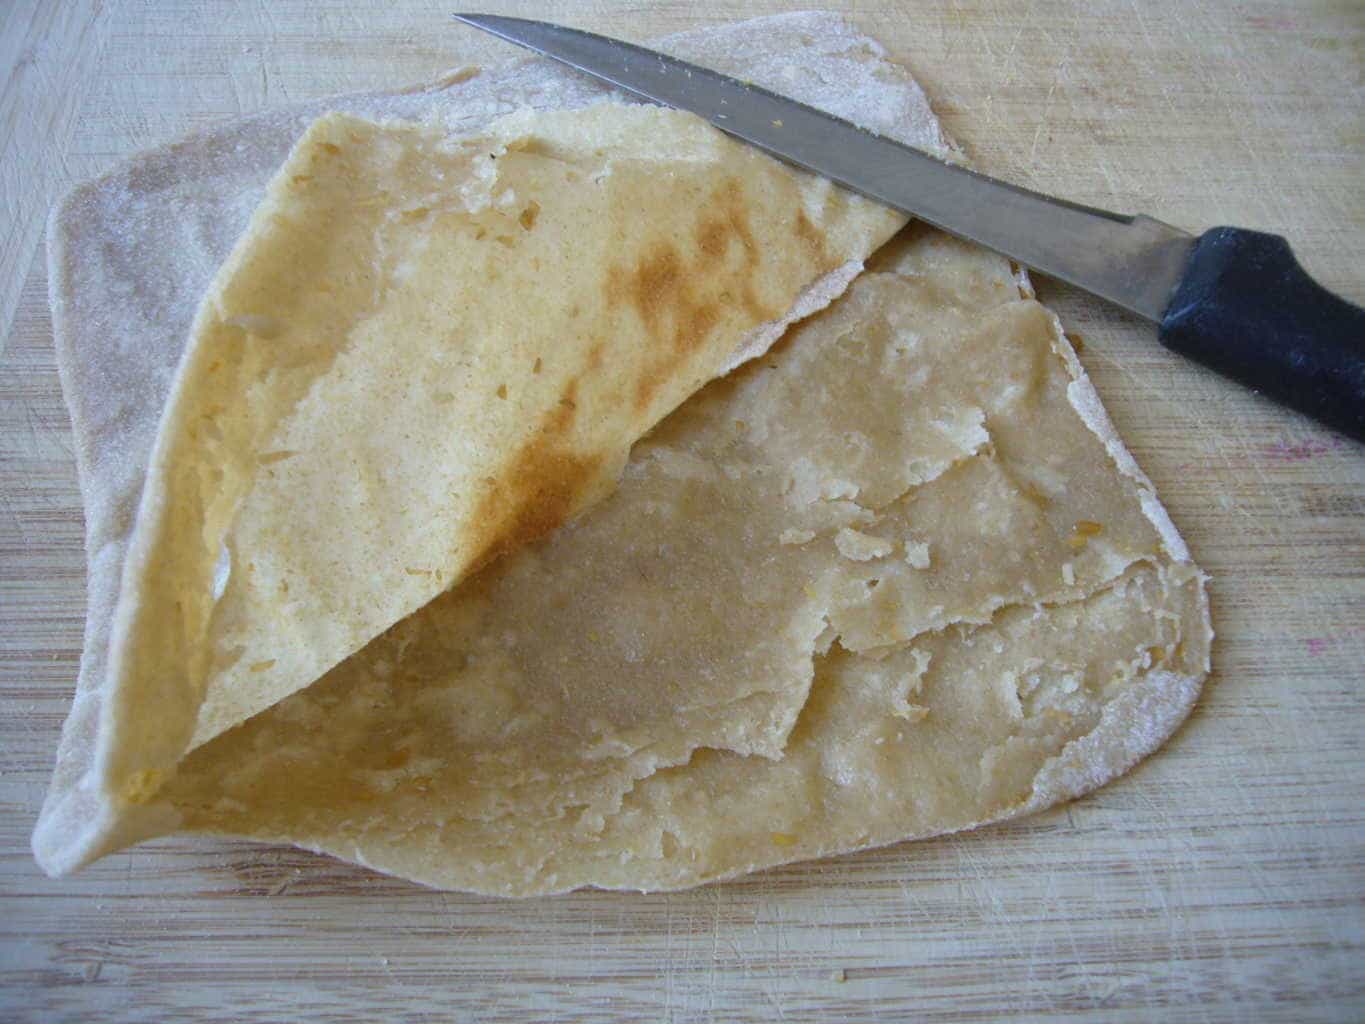 Opening the half cooked paratha layers for making egg paratha.